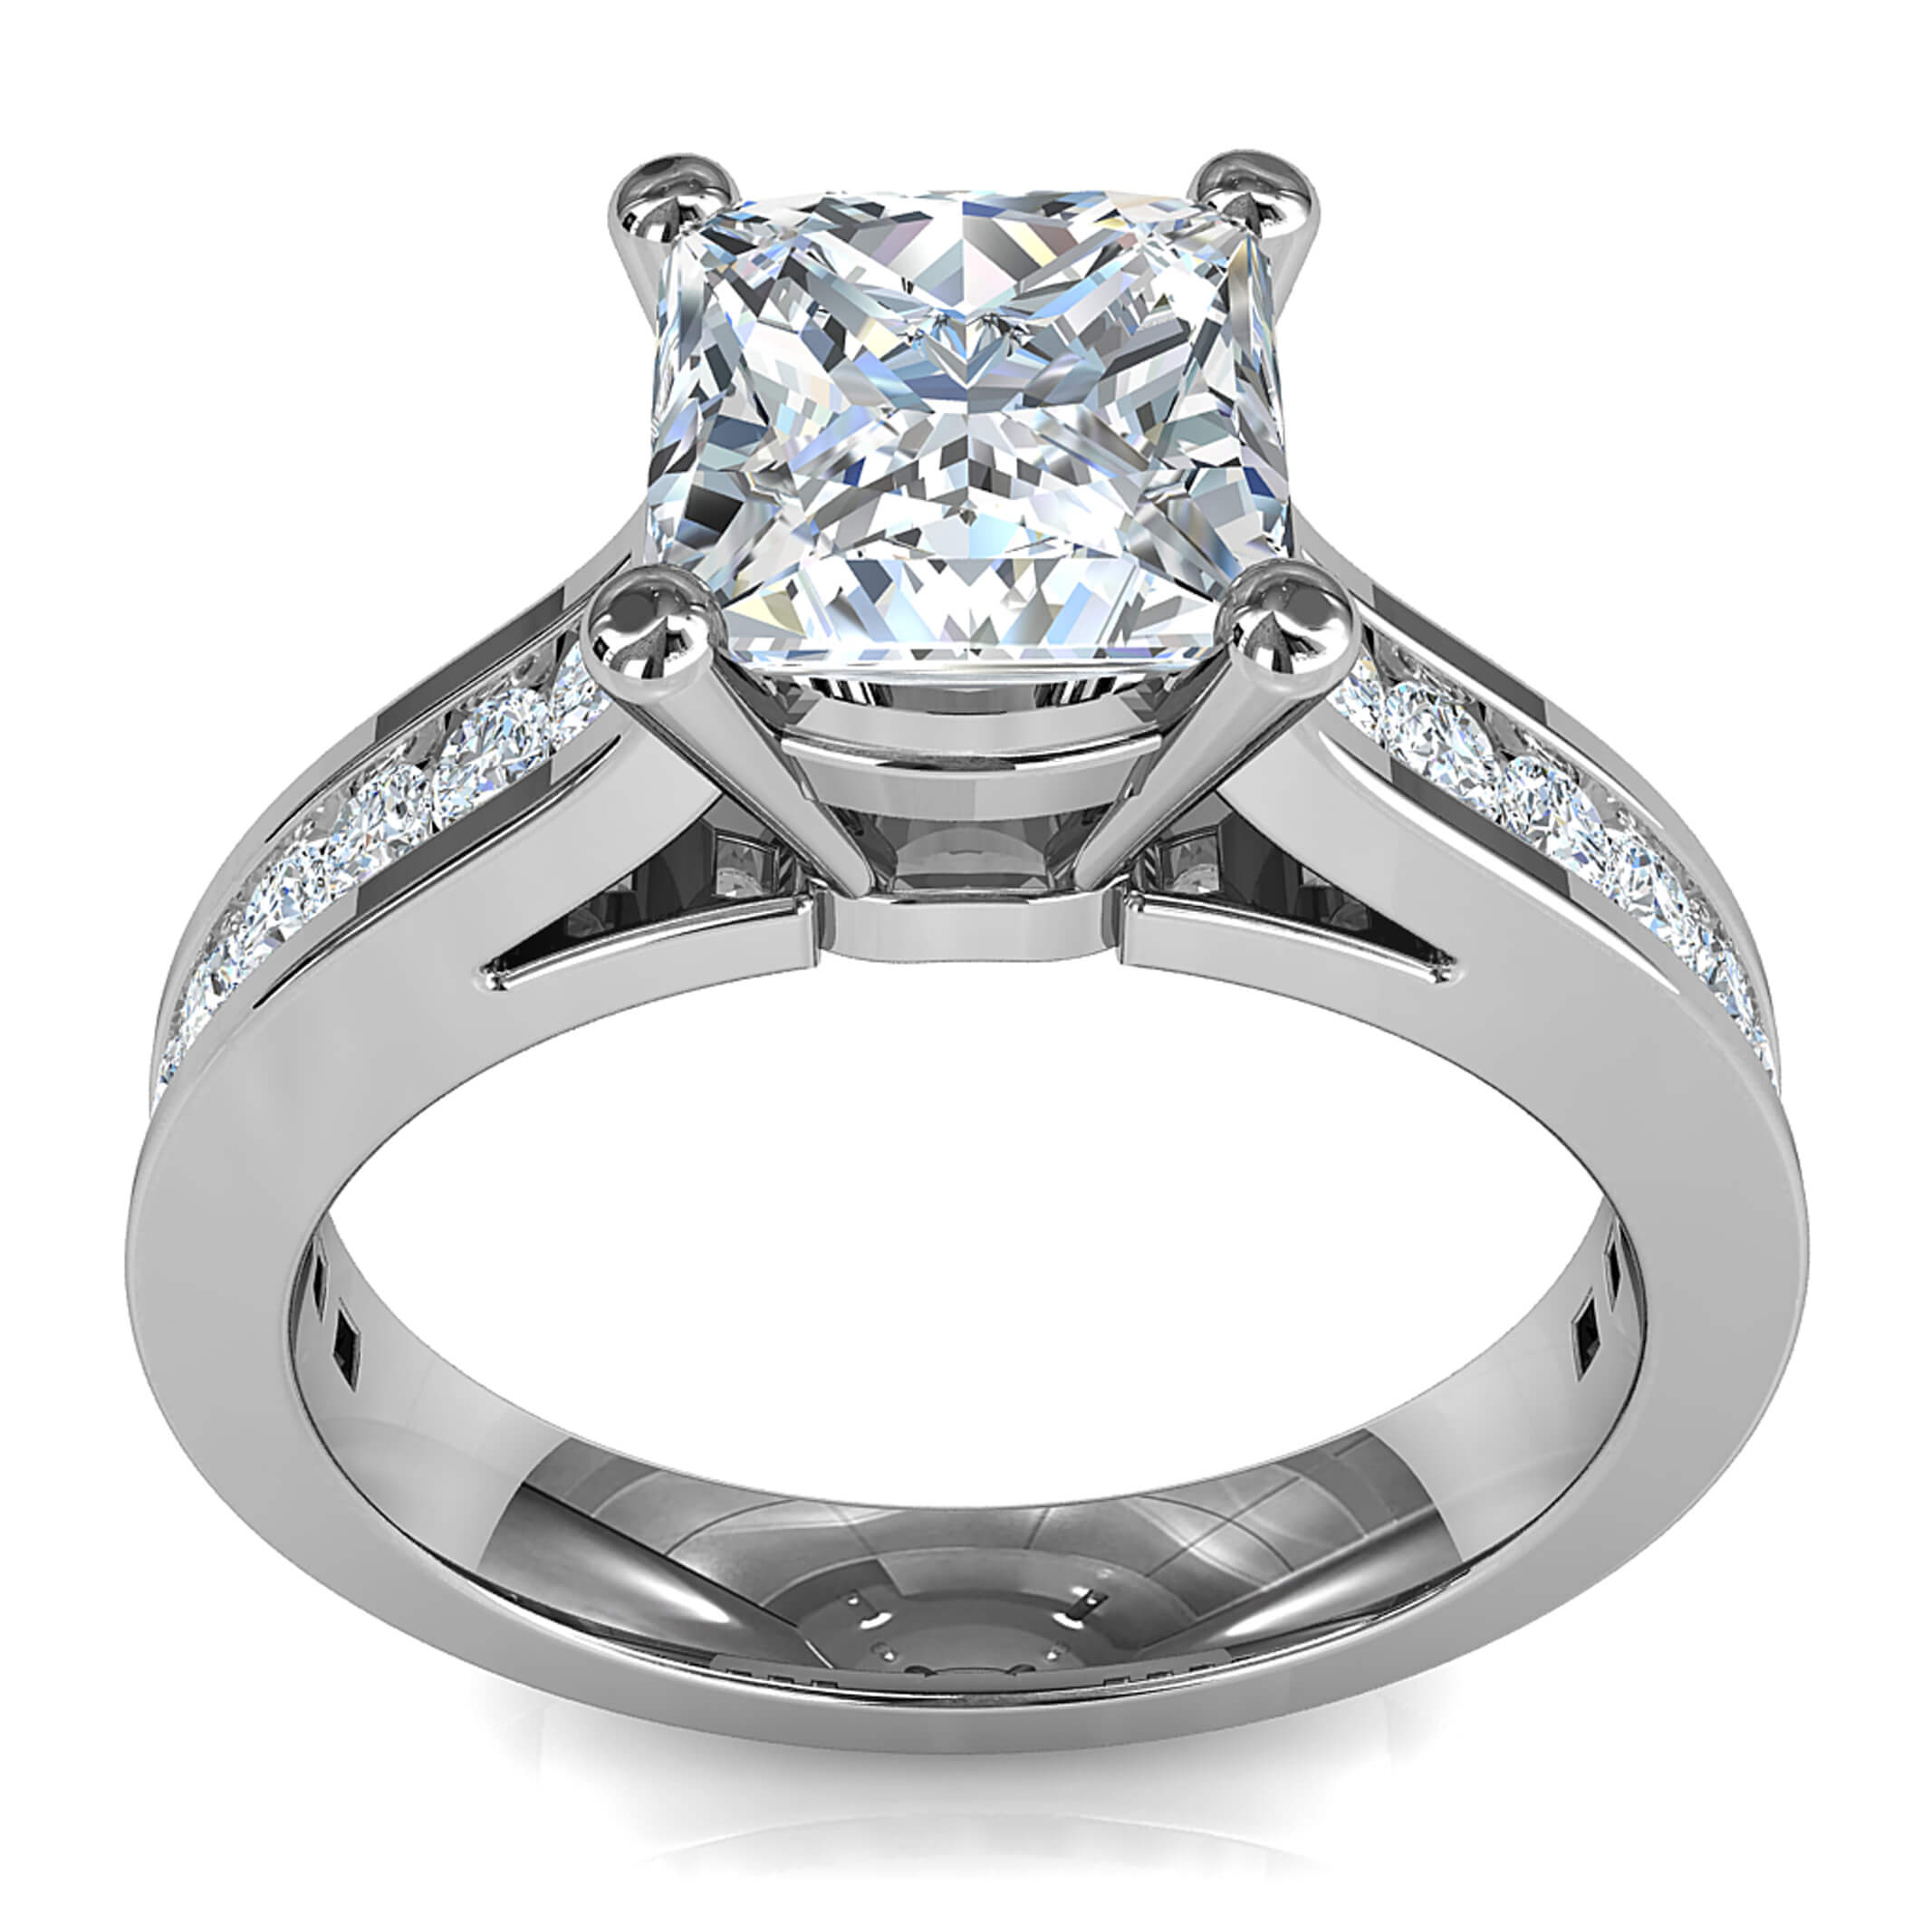 Princess Cut Solitaire Diamond Engagement Ring, 4 Claw Set on a Round Channel Set Band with Classic Underrail Setting.